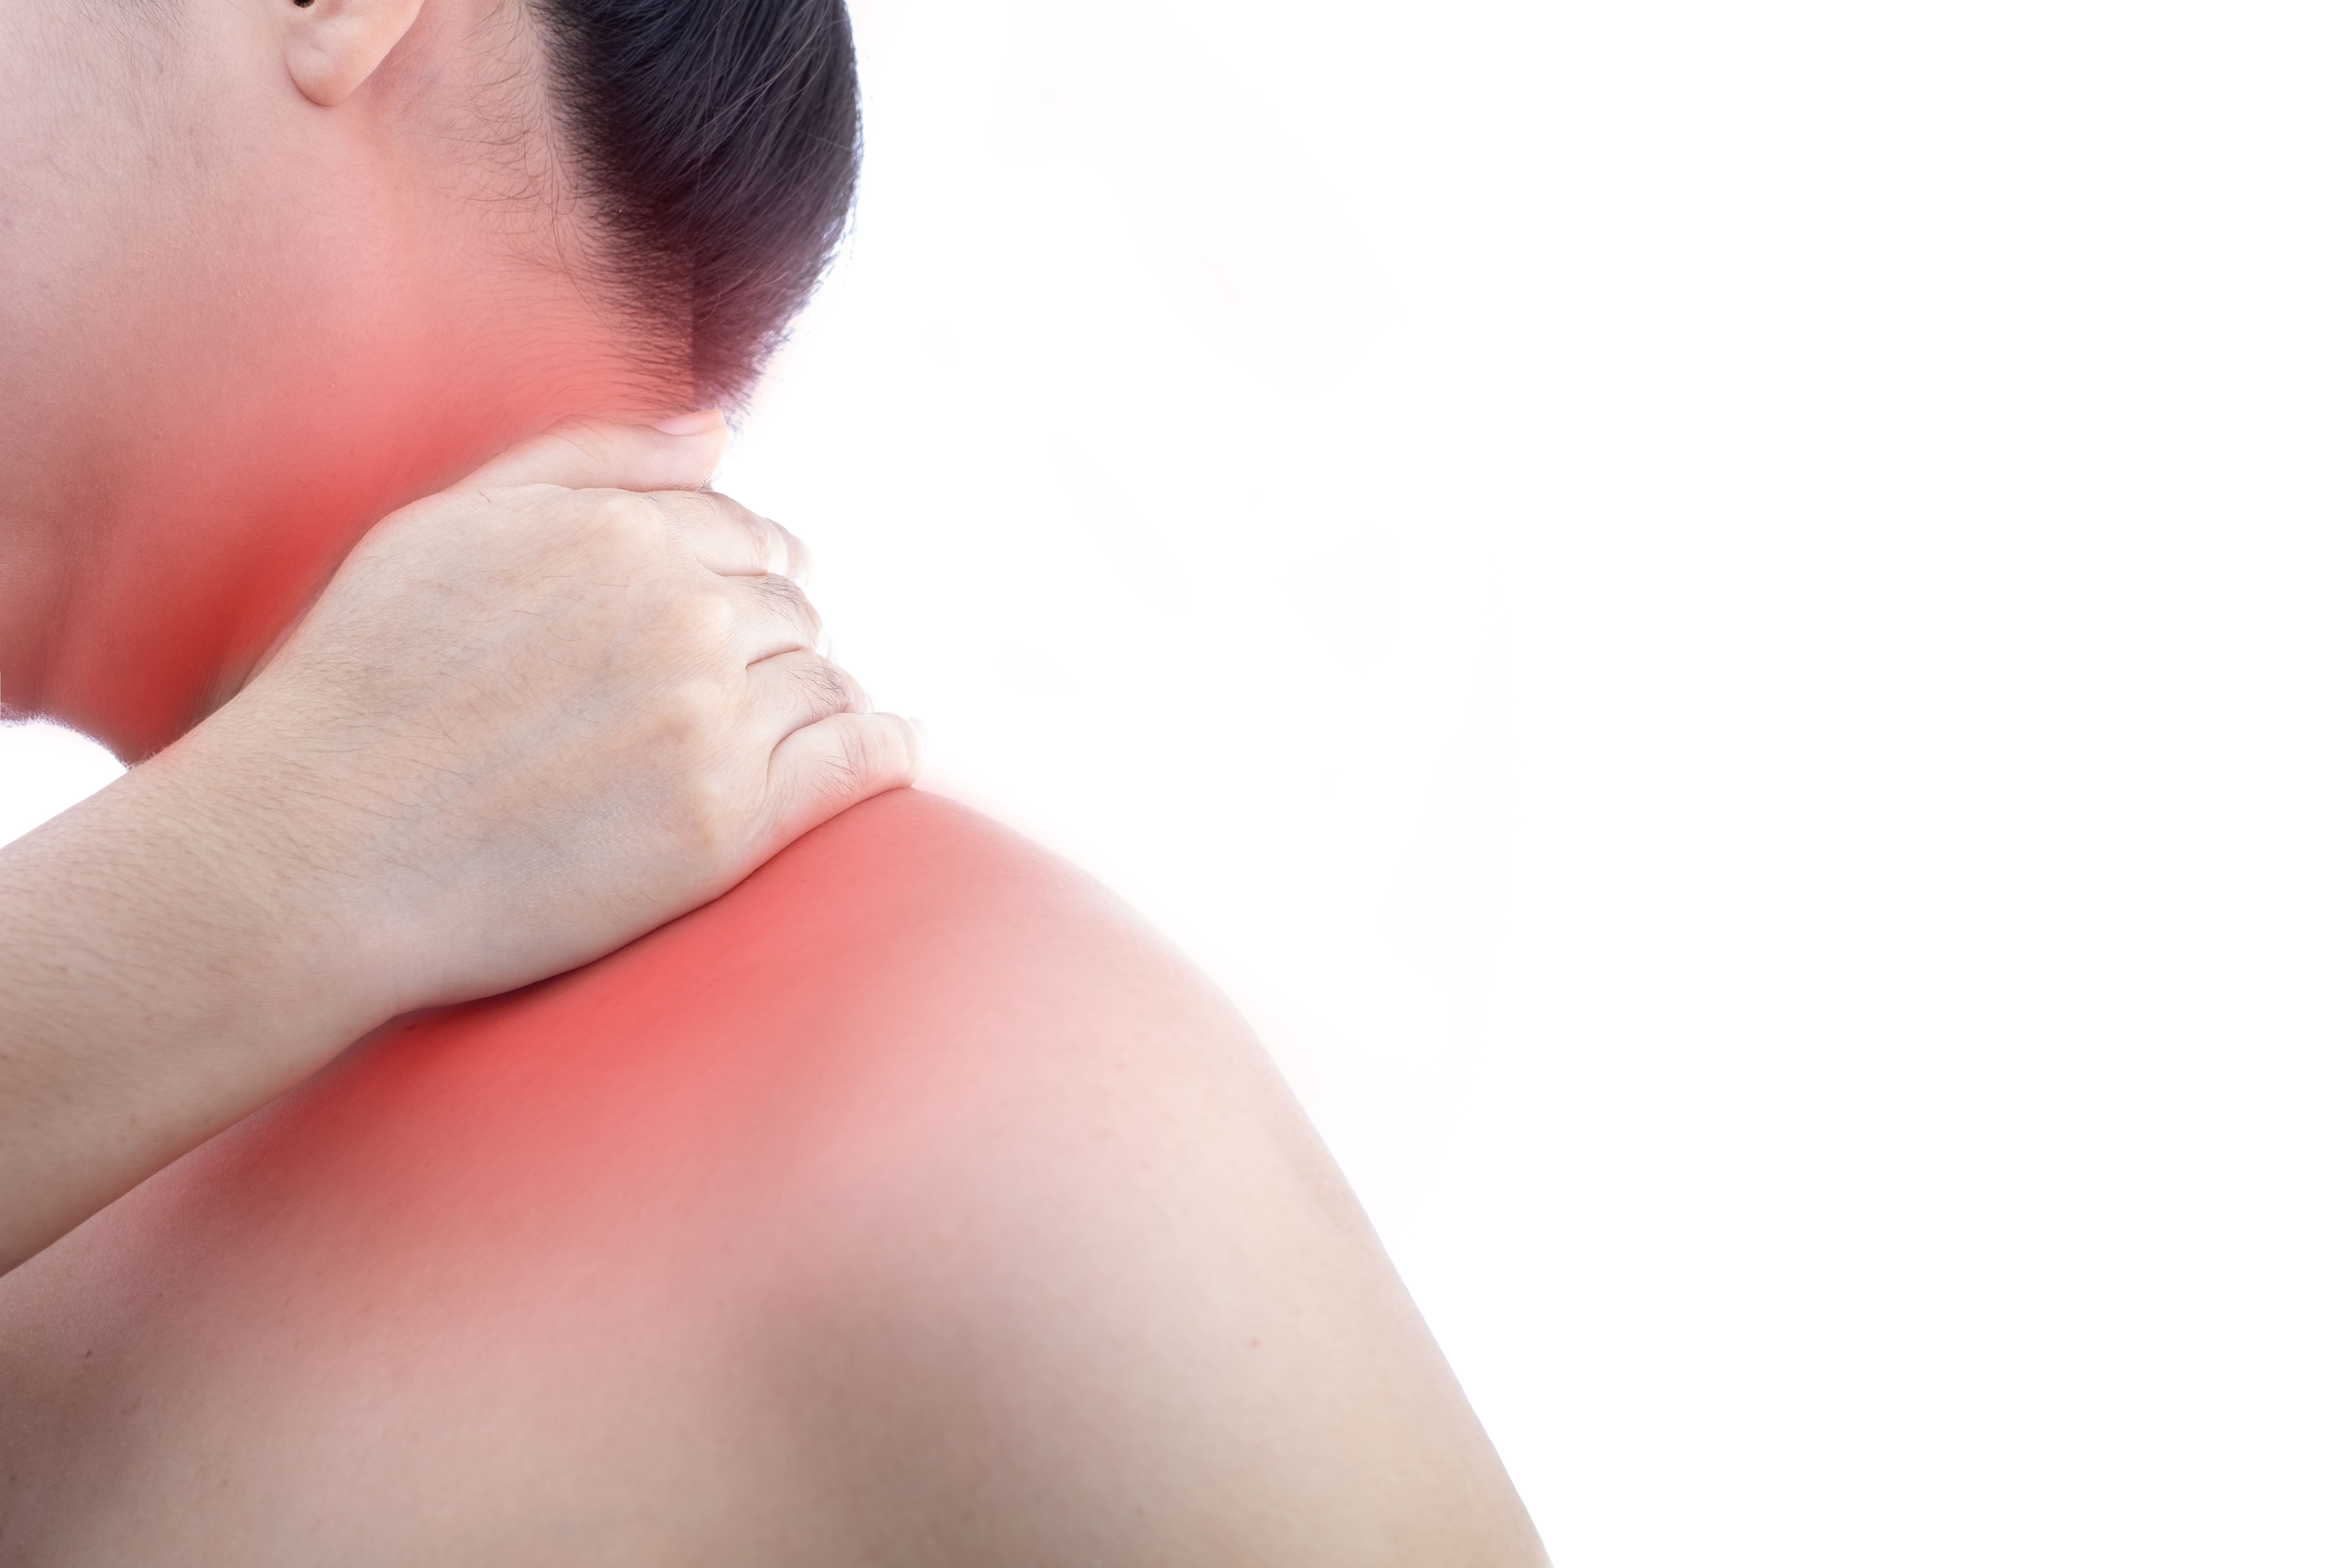 Woman holding her sore neck painful area highlighted in red